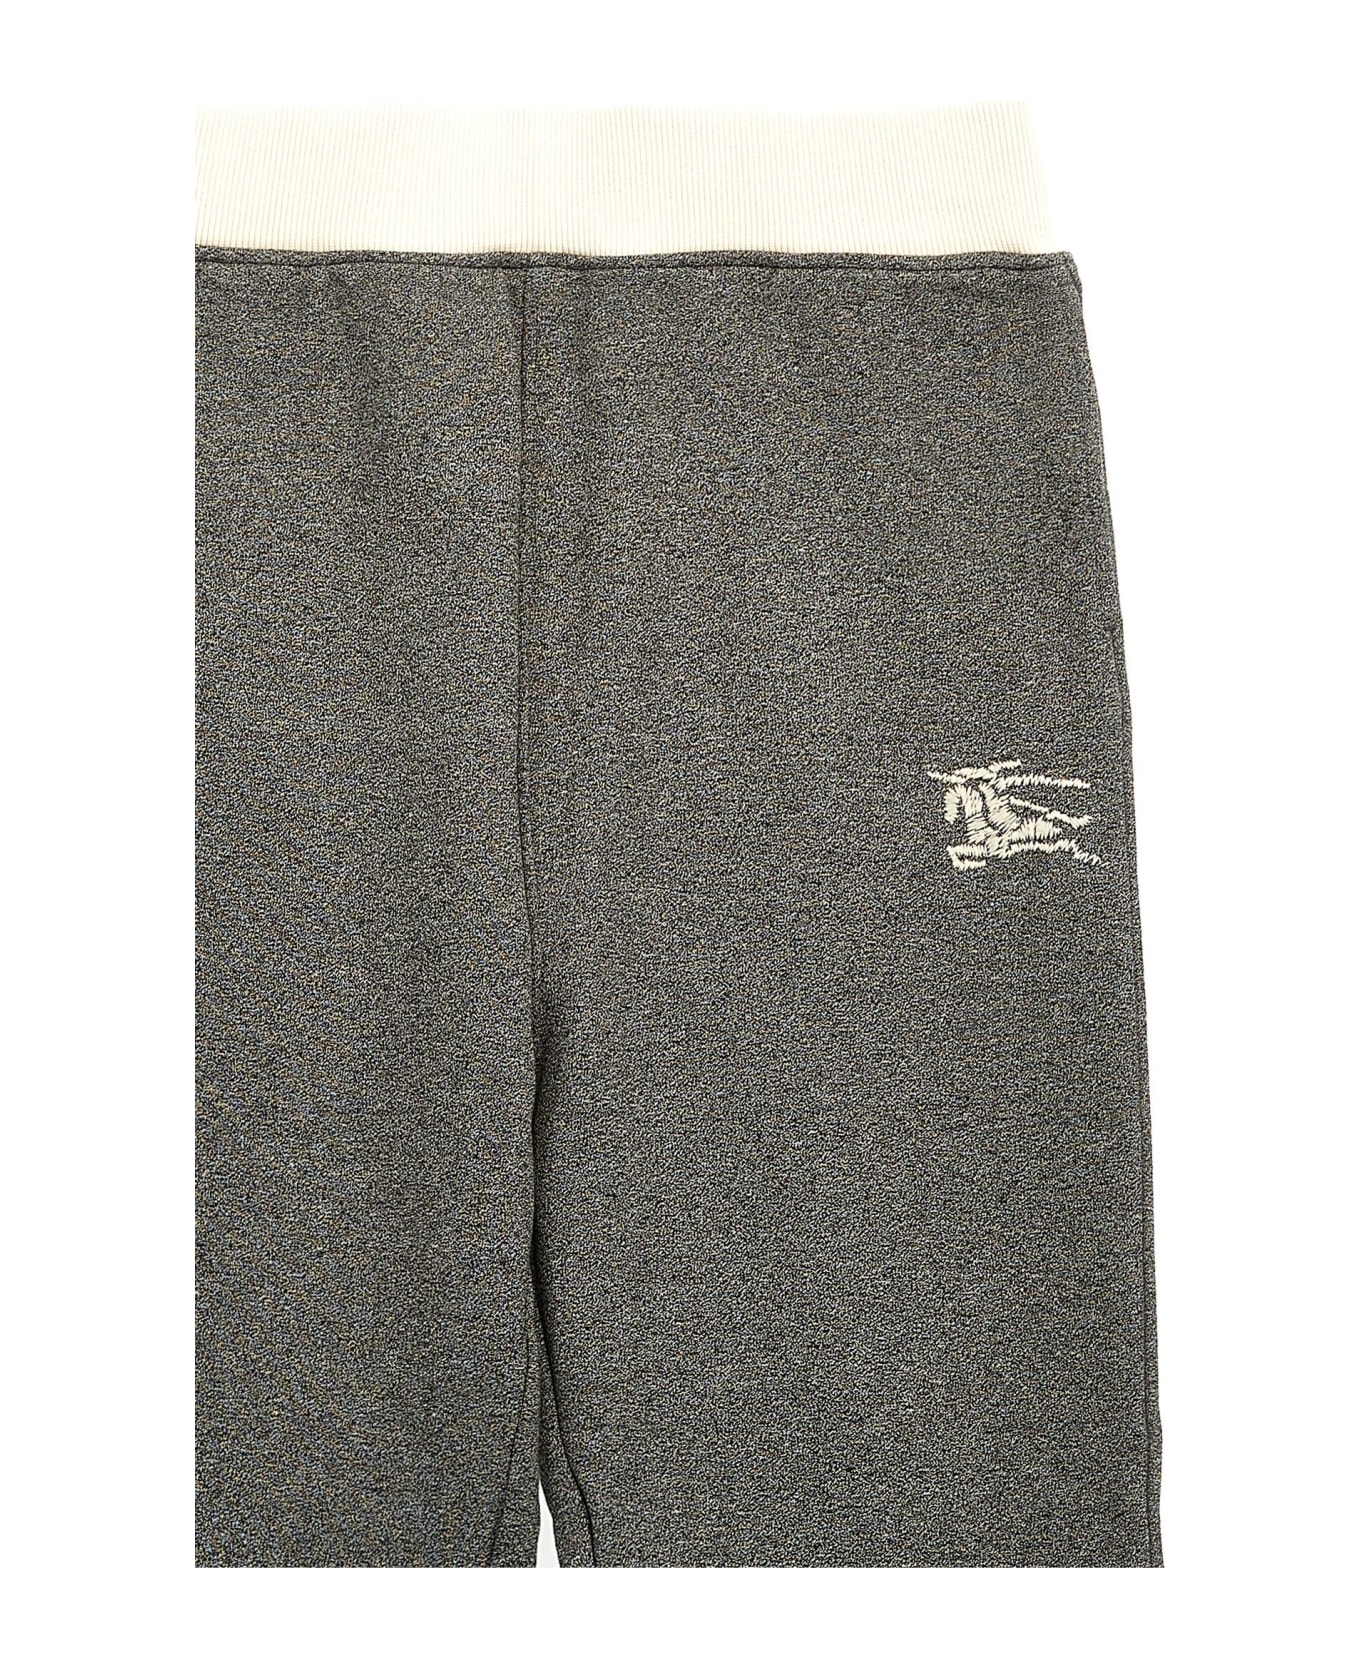 Burberry 'sidney' Joggers - Gray ボトムス